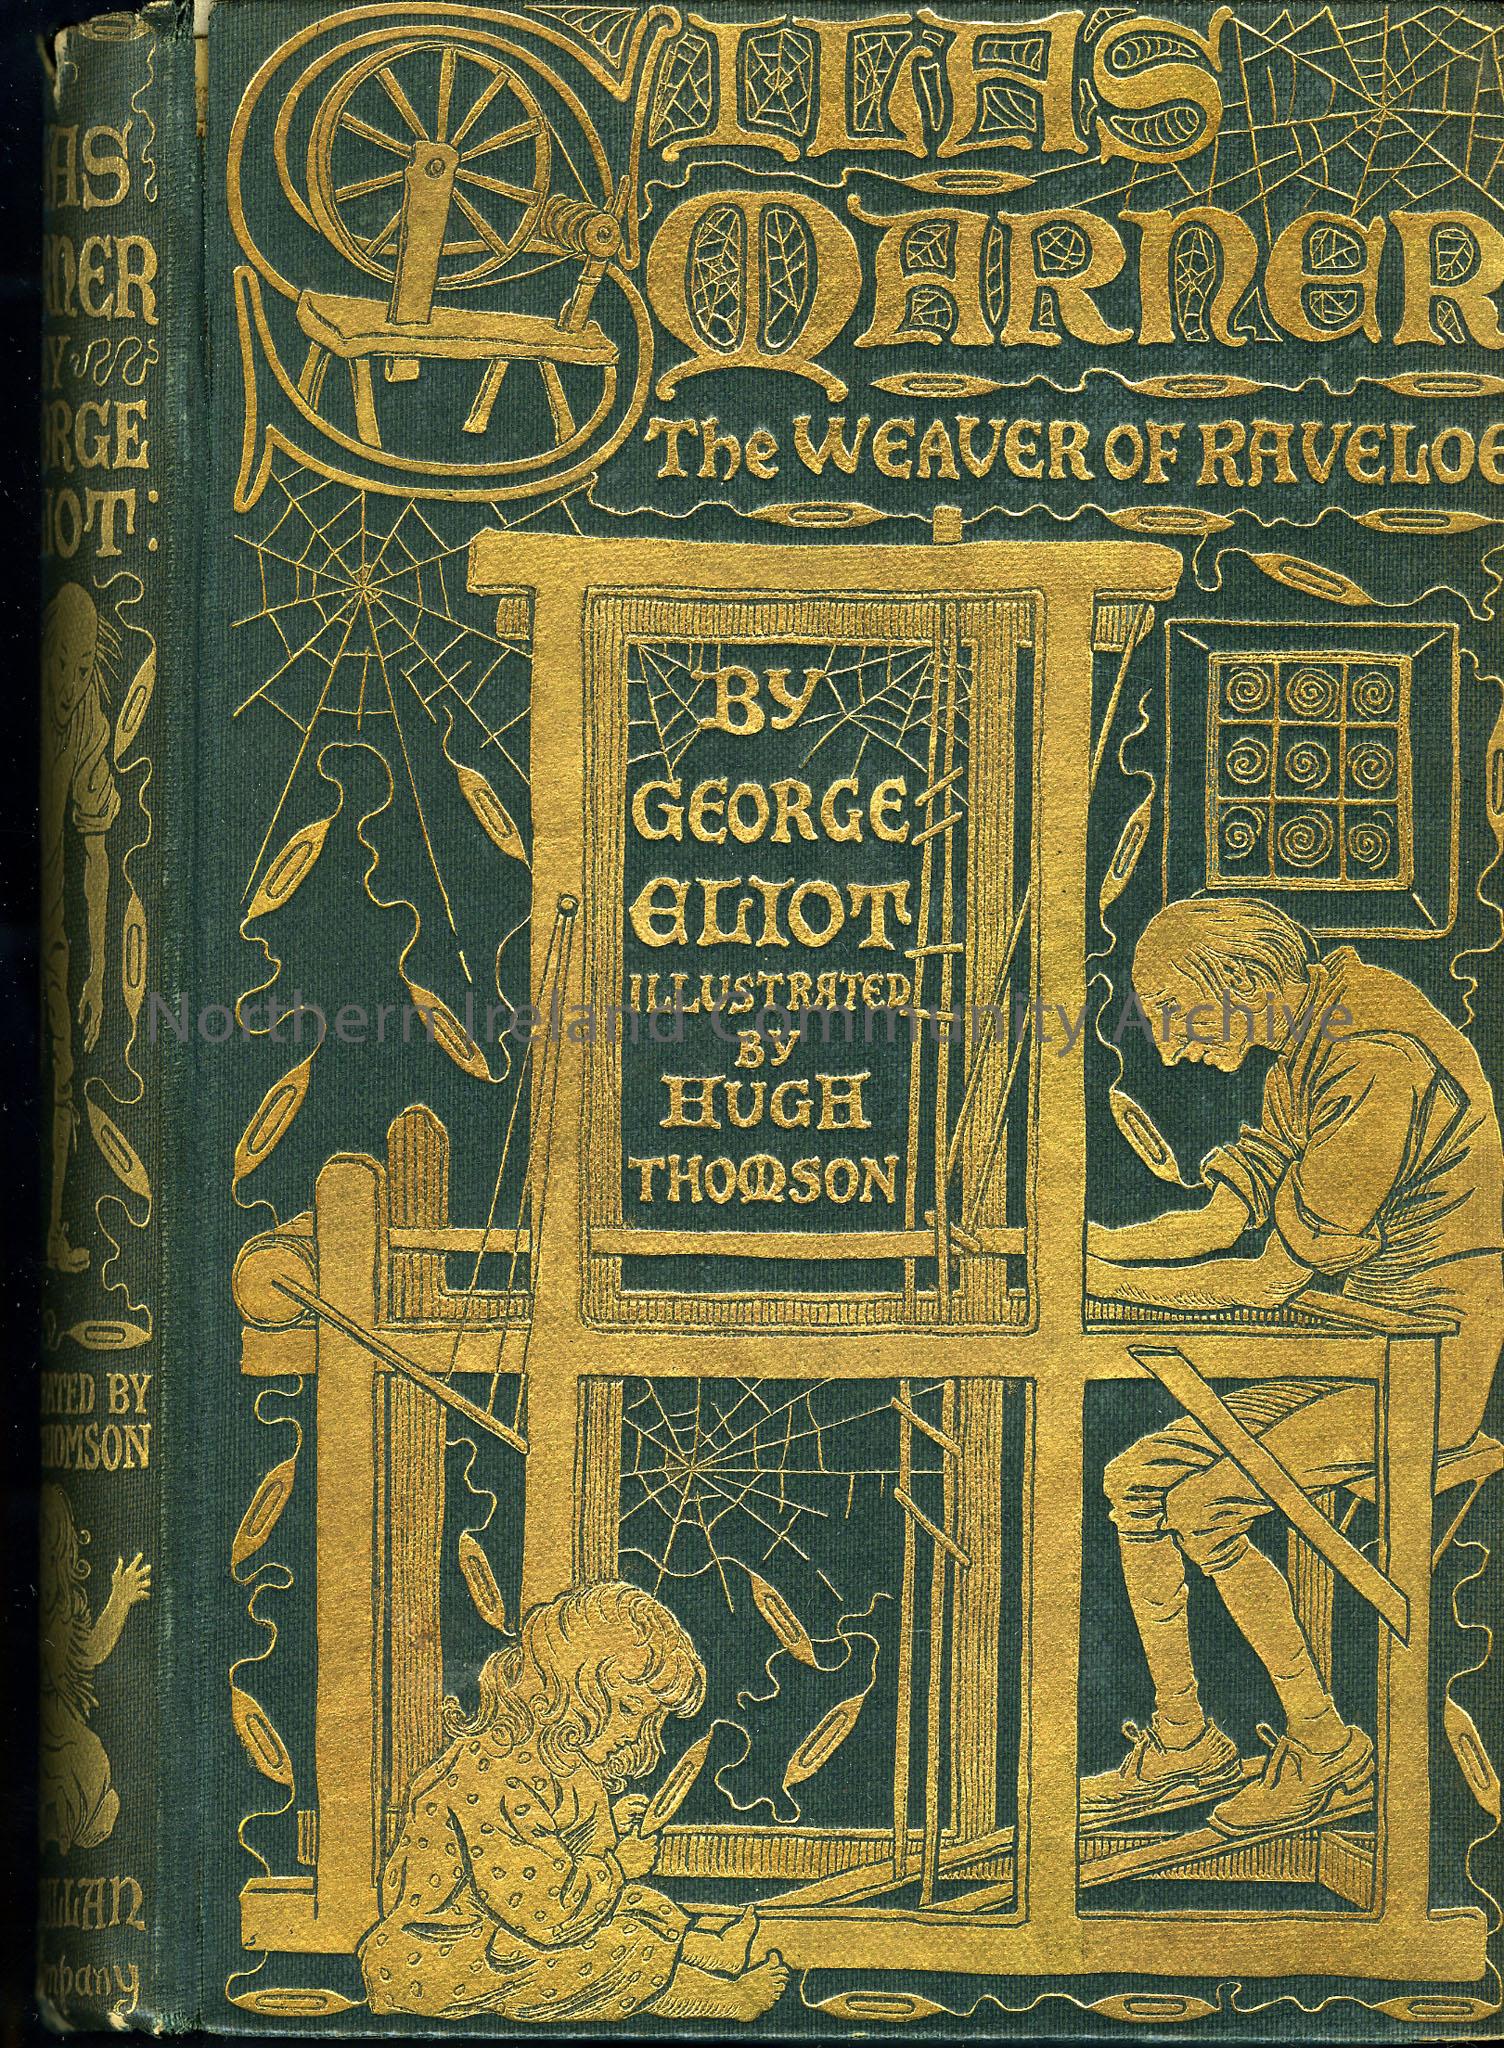 ‘Silas Marner – The Weaver of Raveloe’ by George Eliot, illustrated by Hugh Thomson.